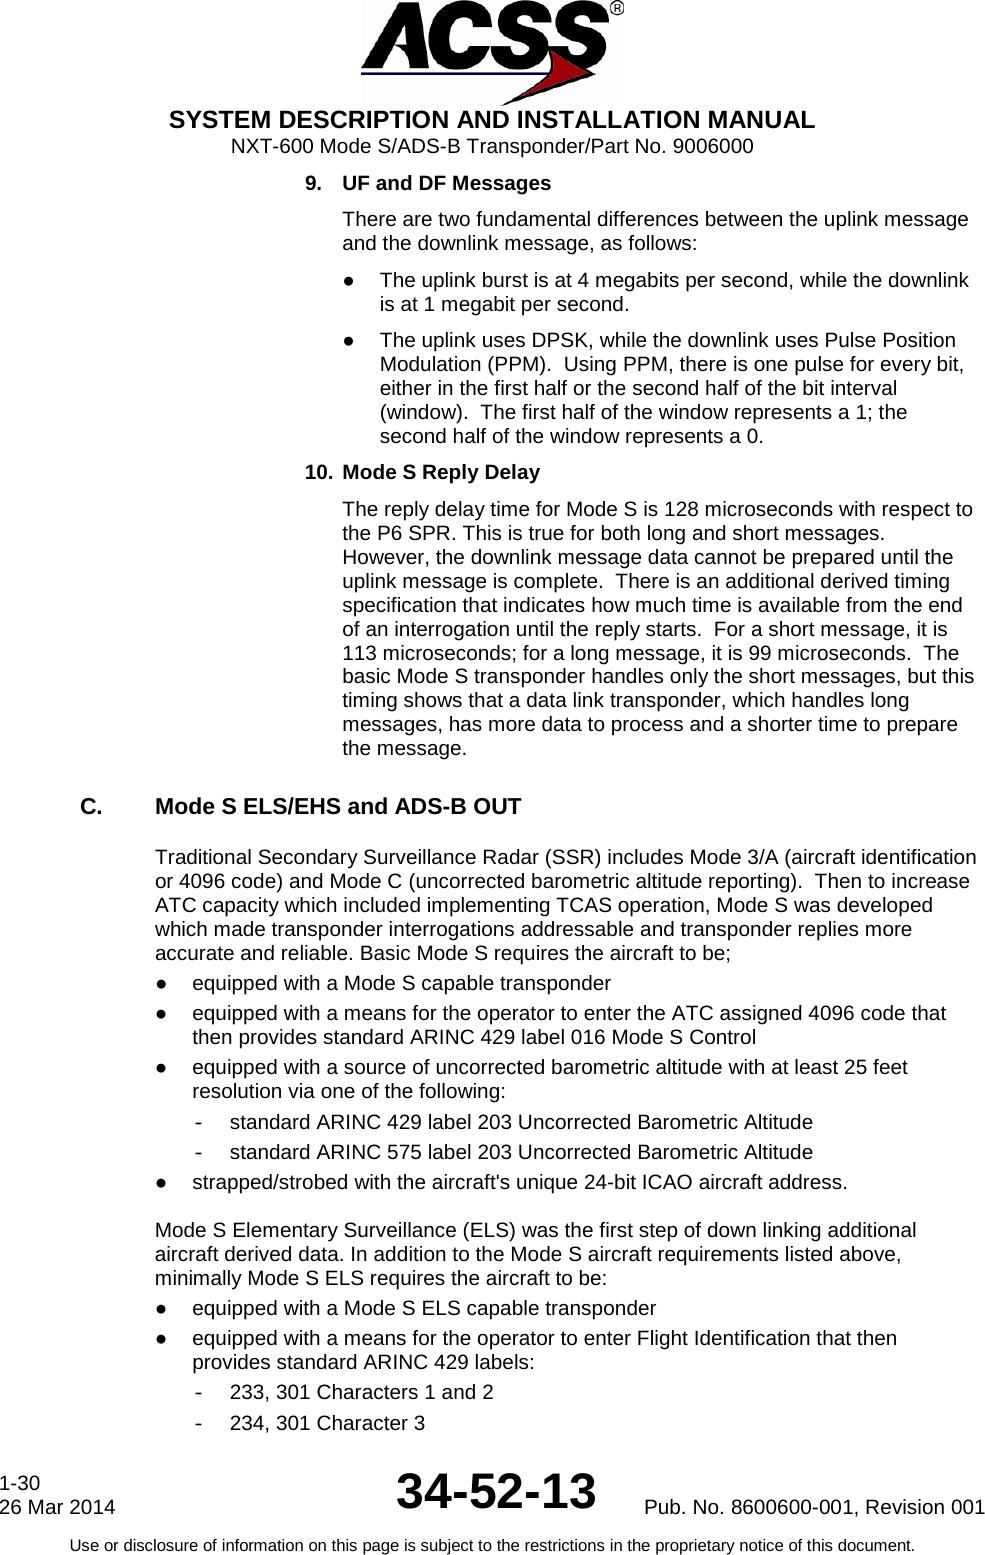  SYSTEM DESCRIPTION AND INSTALLATION MANUAL NXT-600 Mode S/ADS-B Transponder/Part No. 9006000 9. UF and DF Messages There are two fundamental differences between the uplink message and the downlink message, as follows: ● The uplink burst is at 4 megabits per second, while the downlink is at 1 megabit per second. ● The uplink uses DPSK, while the downlink uses Pulse Position Modulation (PPM).  Using PPM, there is one pulse for every bit, either in the first half or the second half of the bit interval (window).  The first half of the window represents a 1; the second half of the window represents a 0. 10. Mode S Reply Delay The reply delay time for Mode S is 128 microseconds with respect to the P6 SPR. This is true for both long and short messages.  However, the downlink message data cannot be prepared until the uplink message is complete.  There is an additional derived timing specification that indicates how much time is available from the end of an interrogation until the reply starts.  For a short message, it is 113 microseconds; for a long message, it is 99 microseconds.  The basic Mode S transponder handles only the short messages, but this timing shows that a data link transponder, which handles long messages, has more data to process and a shorter time to prepare the message. C. Mode S ELS/EHS and ADS-B OUT Traditional Secondary Surveillance Radar (SSR) includes Mode 3/A (aircraft identification or 4096 code) and Mode C (uncorrected barometric altitude reporting).  Then to increase ATC capacity which included implementing TCAS operation, Mode S was developed which made transponder interrogations addressable and transponder replies more accurate and reliable. Basic Mode S requires the aircraft to be; ● equipped with a Mode S capable transponder ● equipped with a means for the operator to enter the ATC assigned 4096 code that then provides standard ARINC 429 label 016 Mode S Control ● equipped with a source of uncorrected barometric altitude with at least 25 feet resolution via one of the following: - standard ARINC 429 label 203 Uncorrected Barometric Altitude - standard ARINC 575 label 203 Uncorrected Barometric Altitude ●  strapped/strobed with the aircraft&apos;s unique 24-bit ICAO aircraft address.  Mode S Elementary Surveillance (ELS) was the first step of down linking additional aircraft derived data. In addition to the Mode S aircraft requirements listed above, minimally Mode S ELS requires the aircraft to be: ● equipped with a Mode S ELS capable transponder ● equipped with a means for the operator to enter Flight Identification that then provides standard ARINC 429 labels: - 233, 301 Characters 1 and 2 - 234, 301 Character 3 1-30 26 Mar 2014 34-52-13 Pub. No. 8600600-001, Revision 001 Use or disclosure of information on this page is subject to the restrictions in the proprietary notice of this document.  